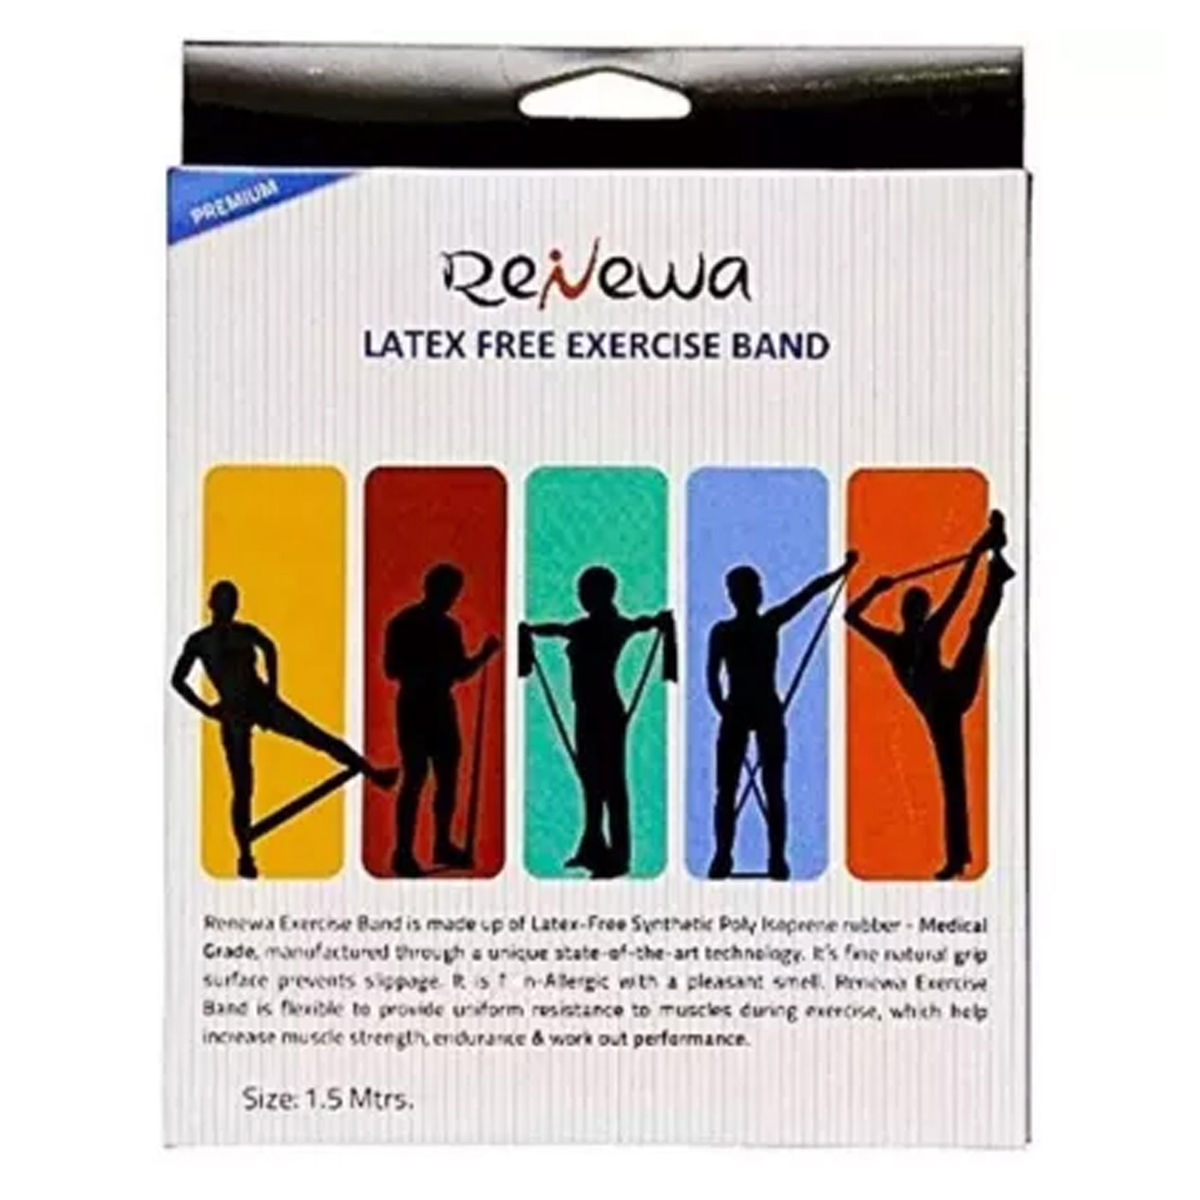 Buy Renewa Latex Free Exercise Green Band, 1 Count Online